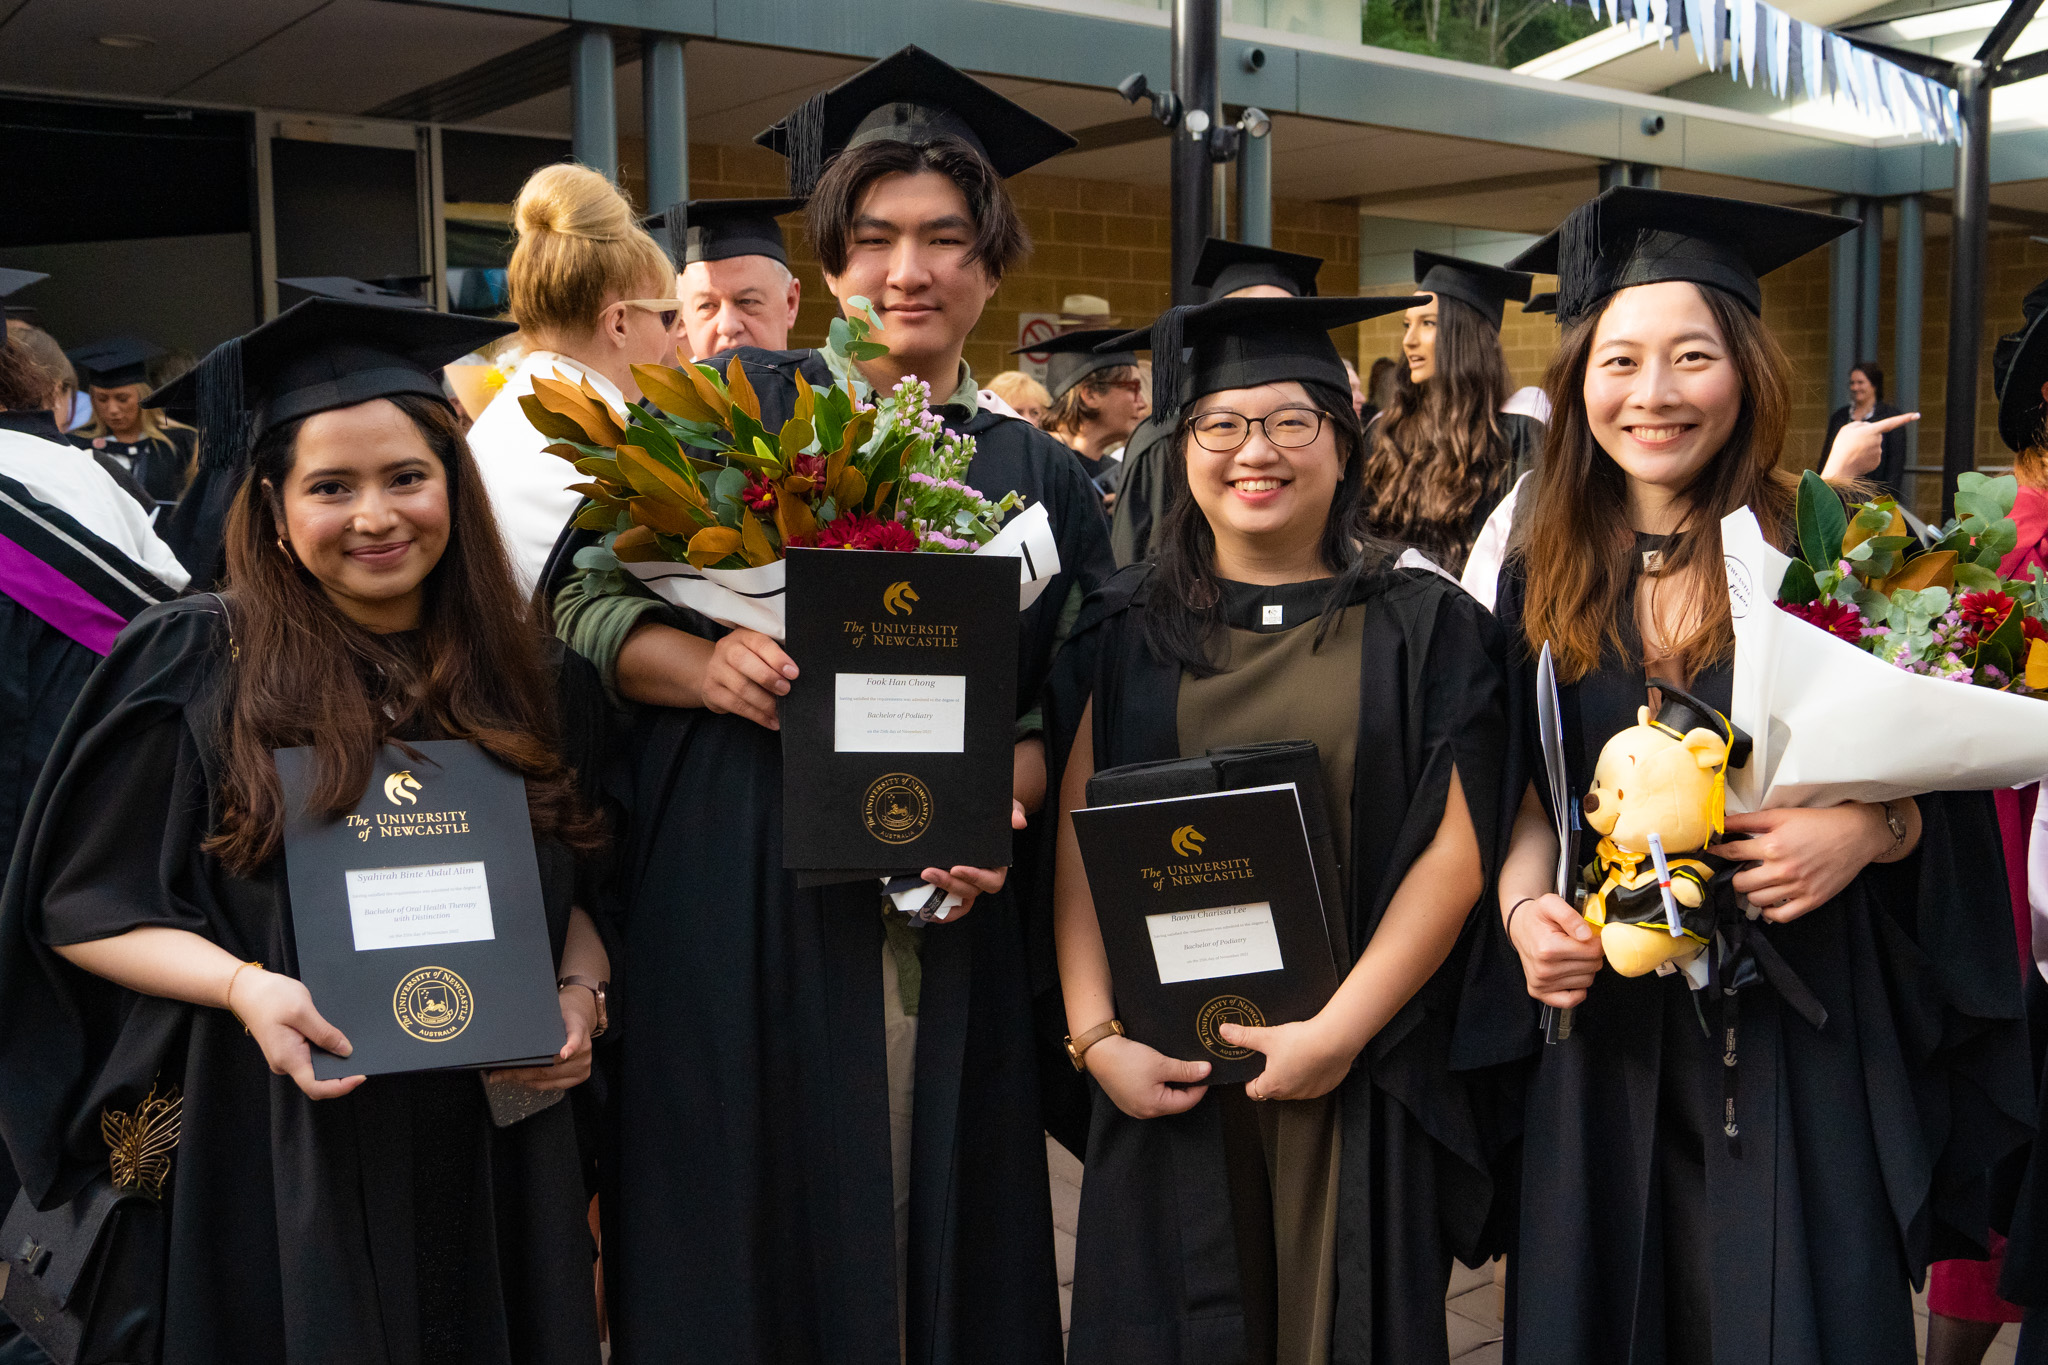 Syahirah Binte Abdul Alim (left) with fellow graduates from the College of Health, Medicine and Wellbeing